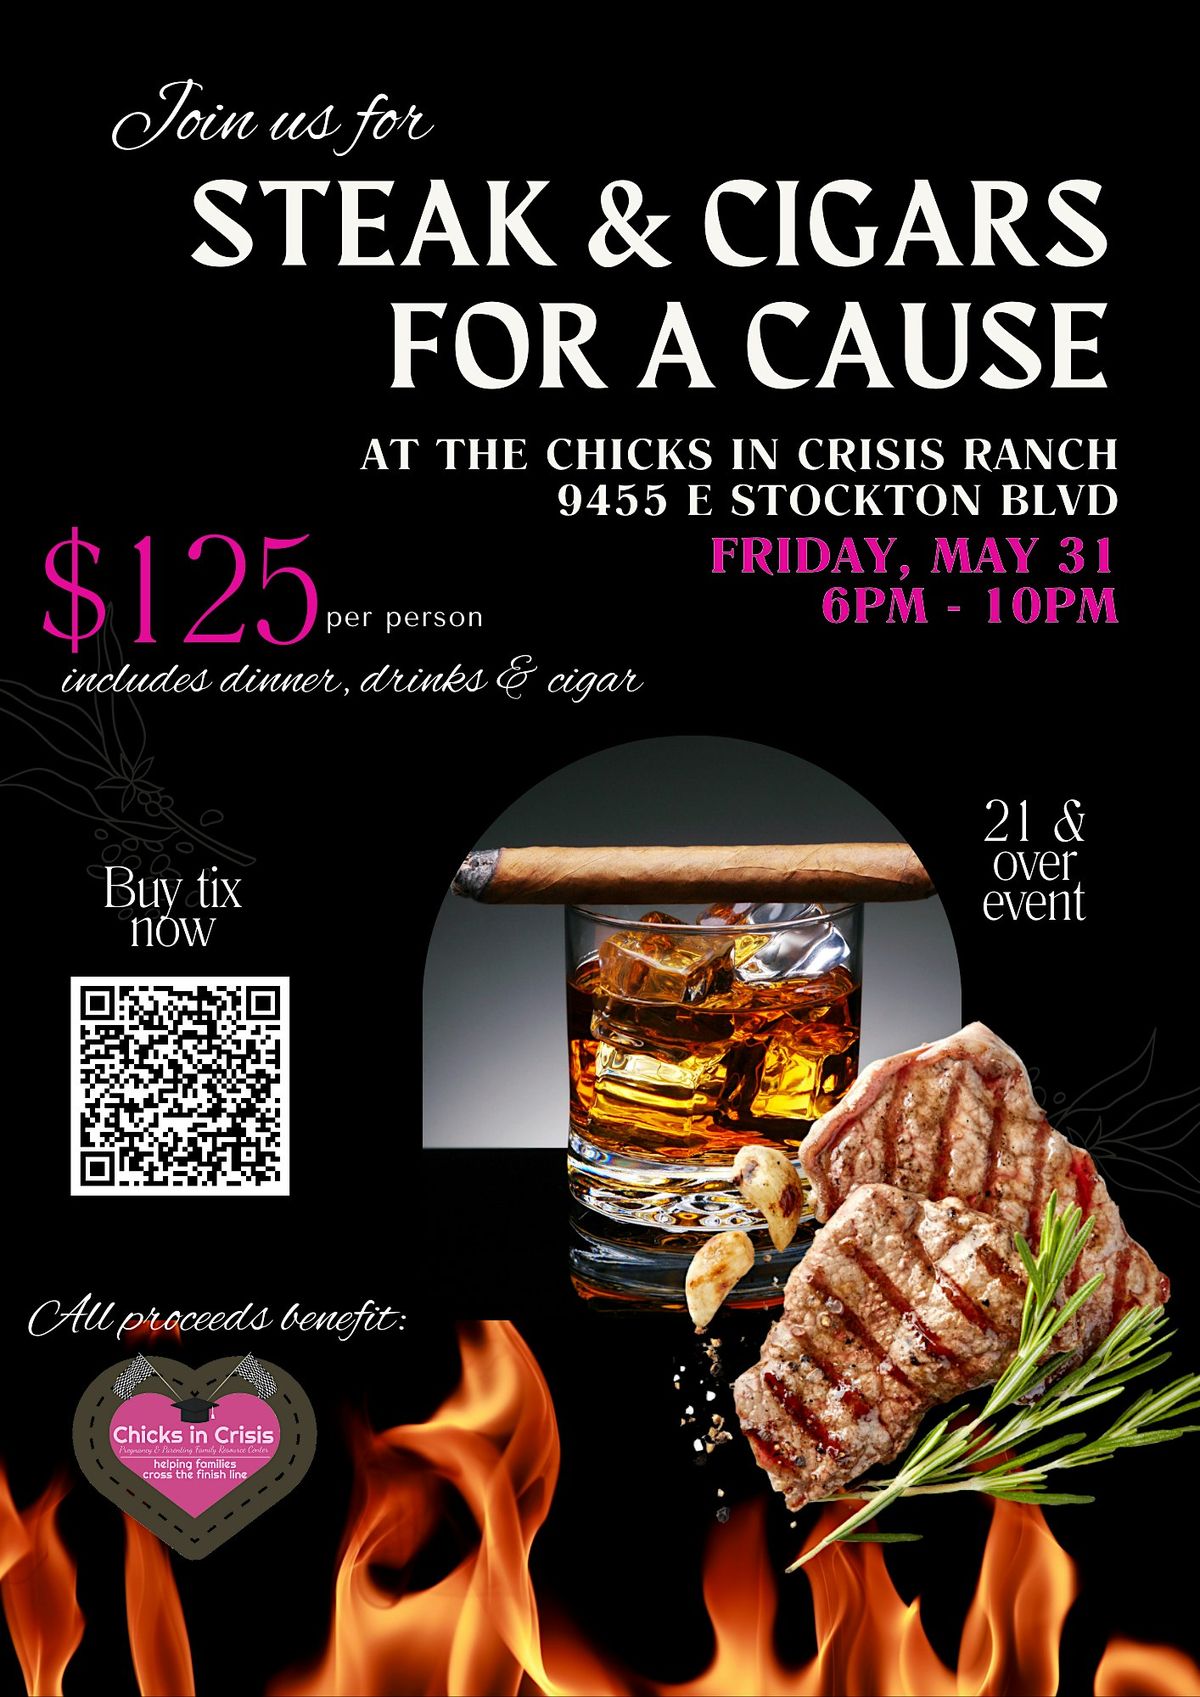 Steak & Cigars for a Cause